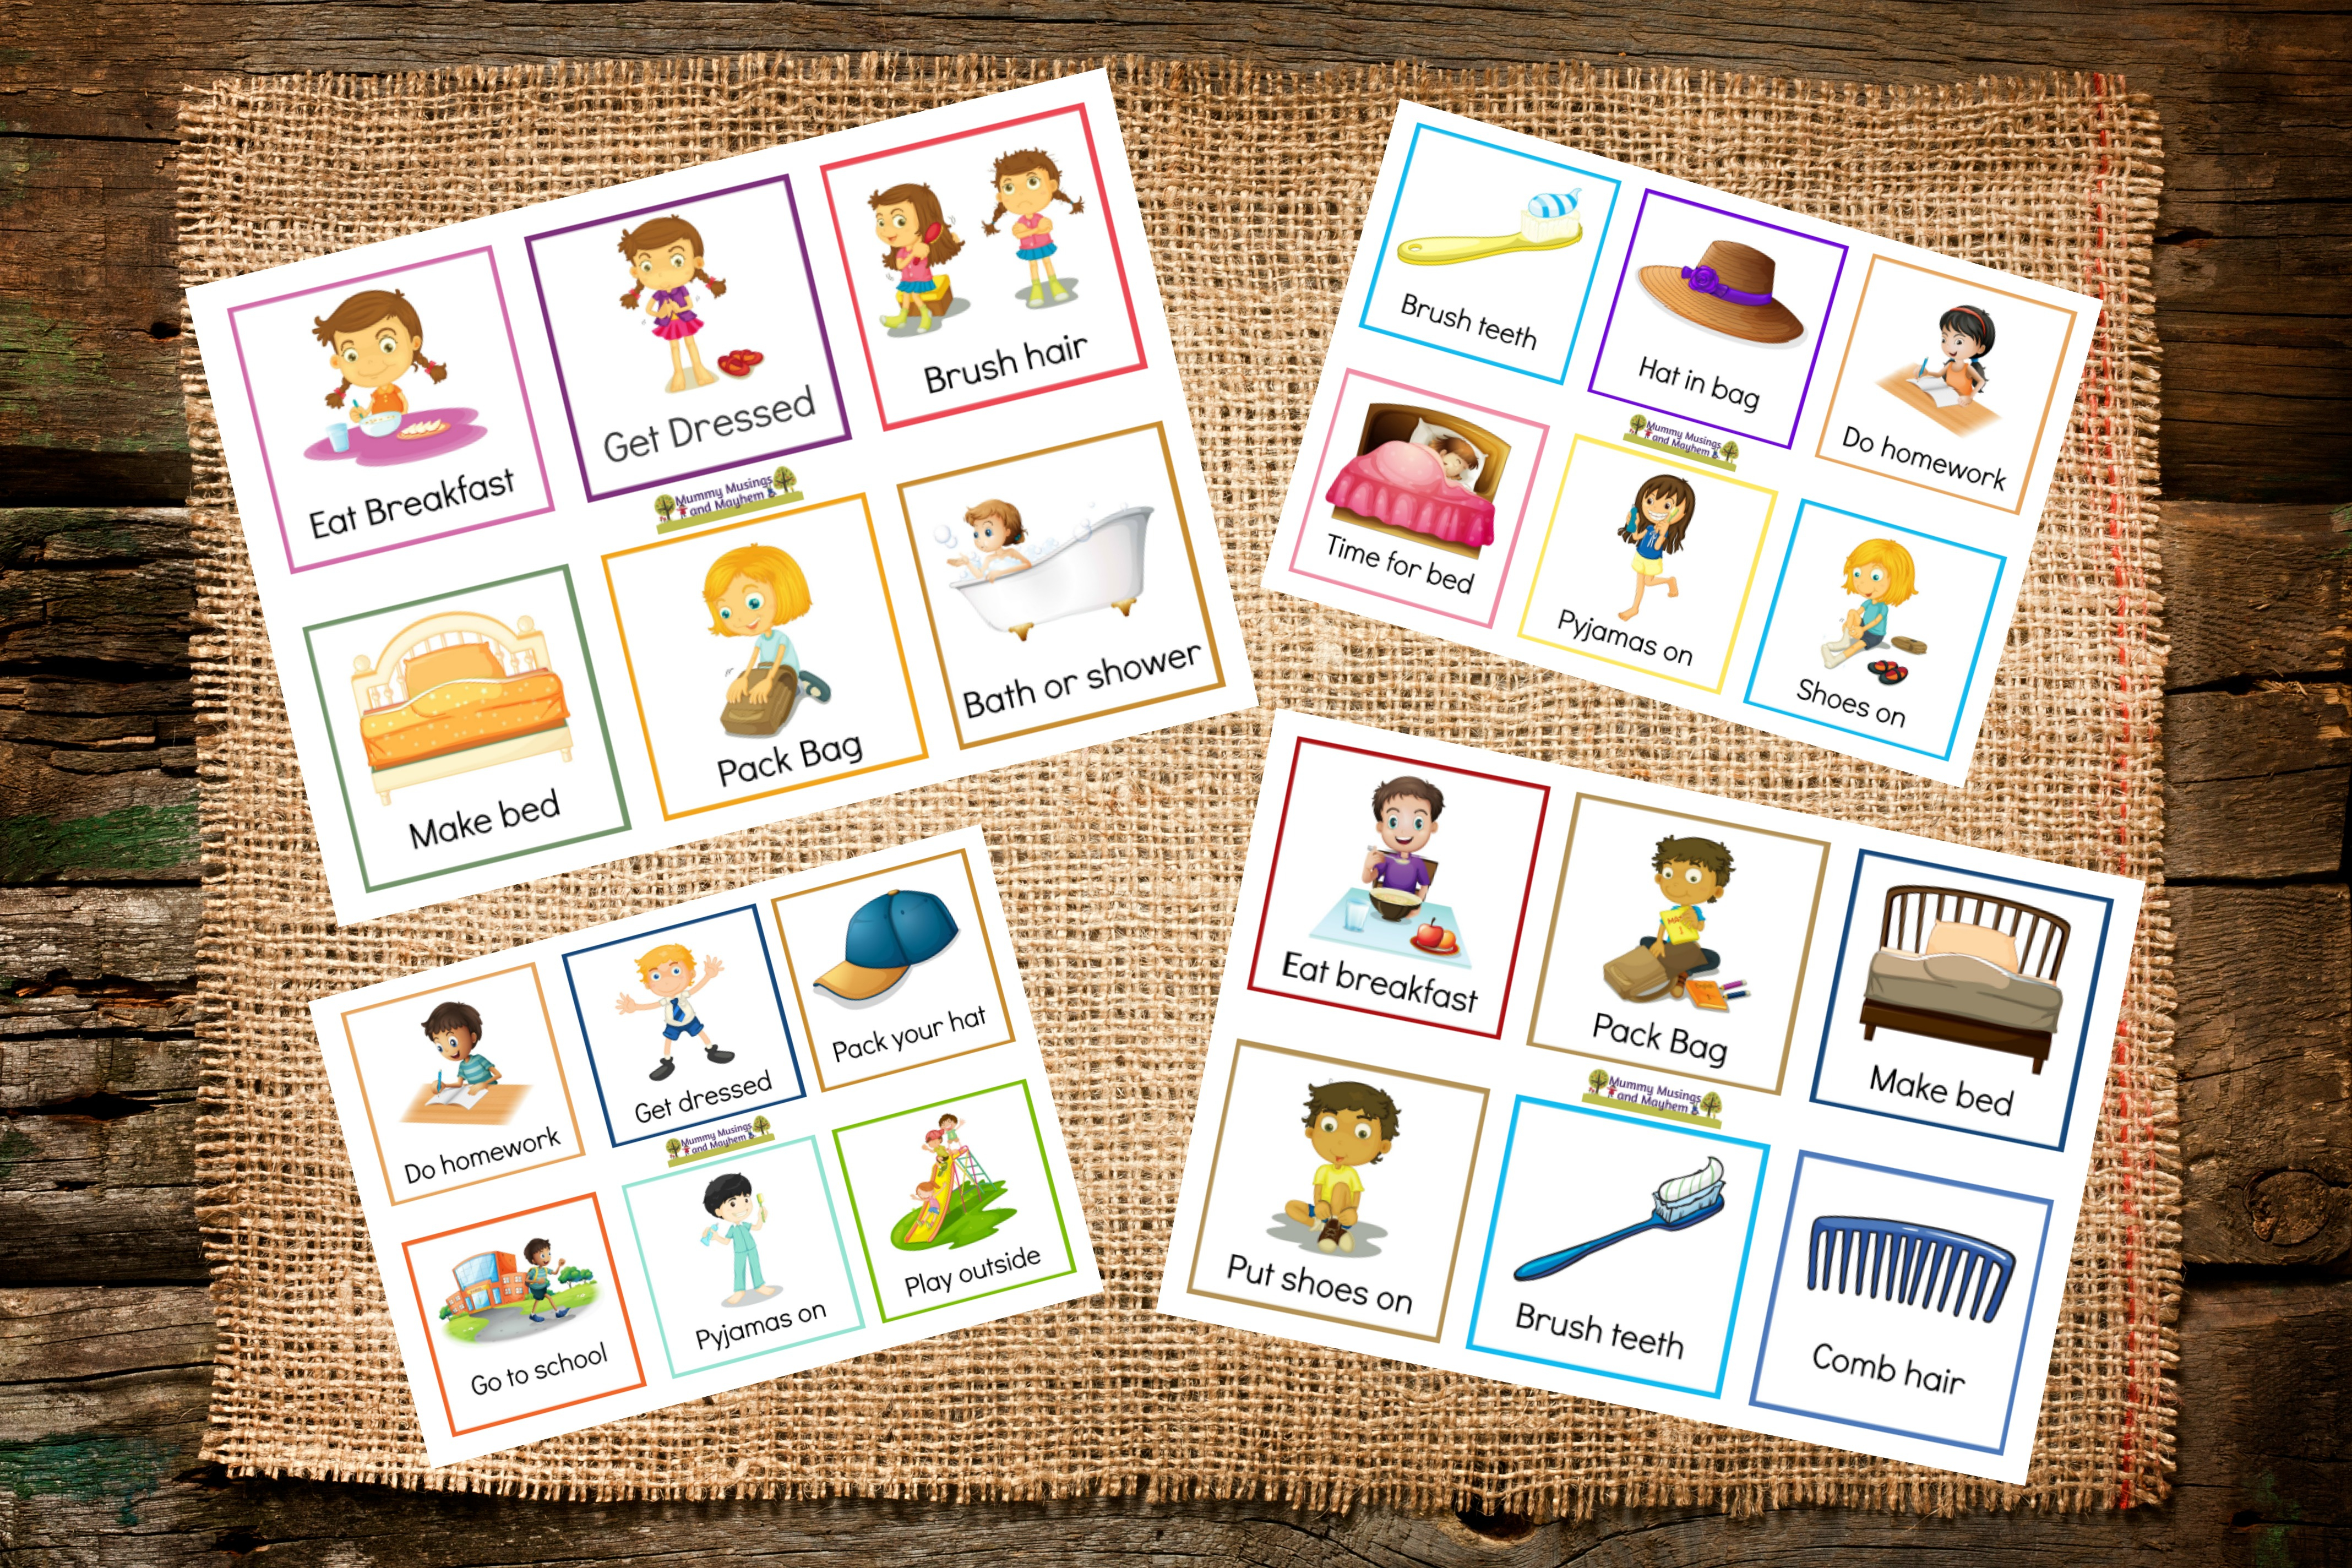 Back To School Routines - Free Printable Cards To Make It Easier - Free Printable Picture Cards